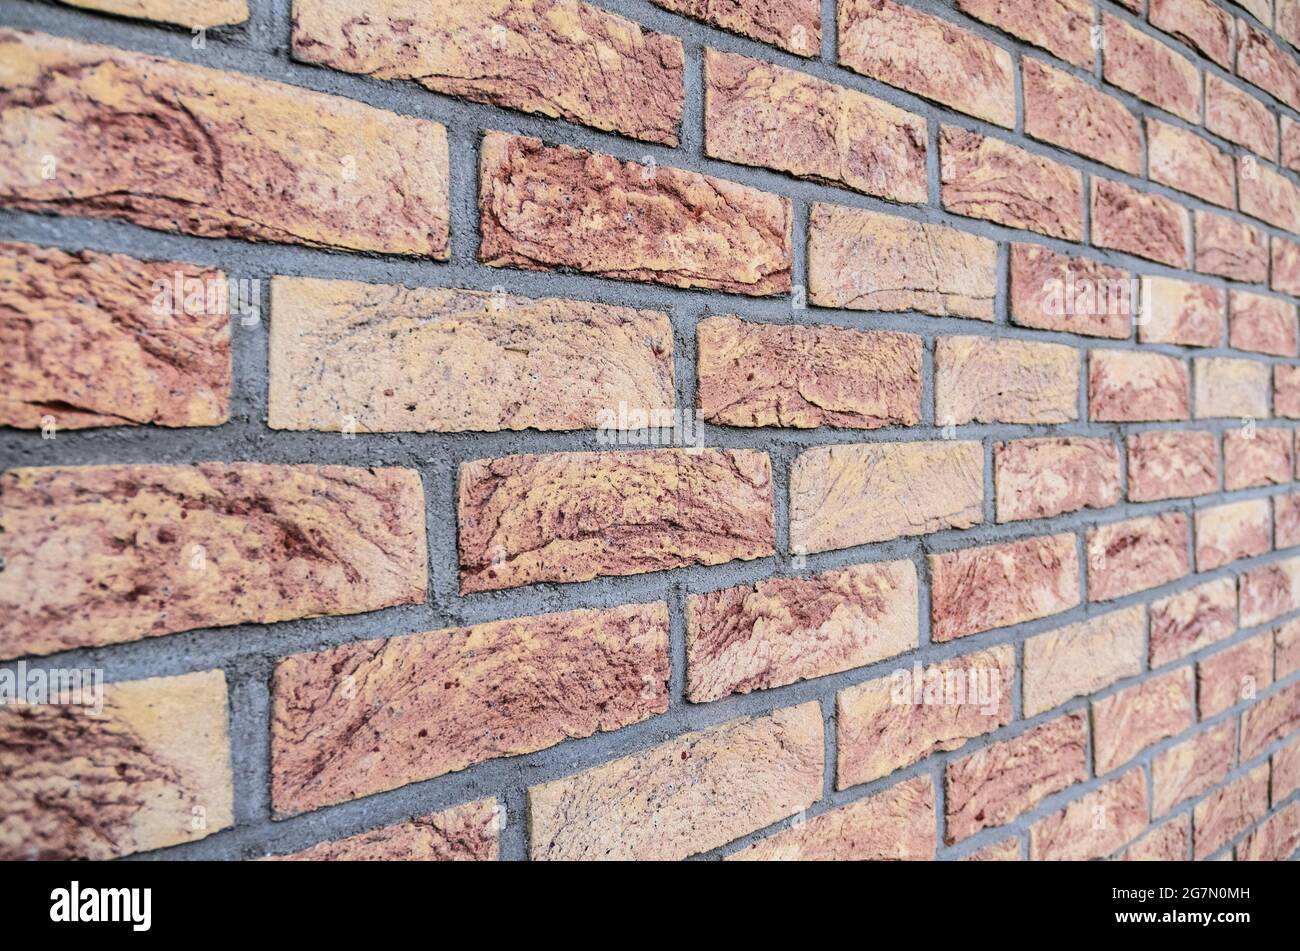 Red brick wall, stretcher bond, simplest repeating pattern of brickwork, rows of bricks, side view with diminishing perspective Stock Photo